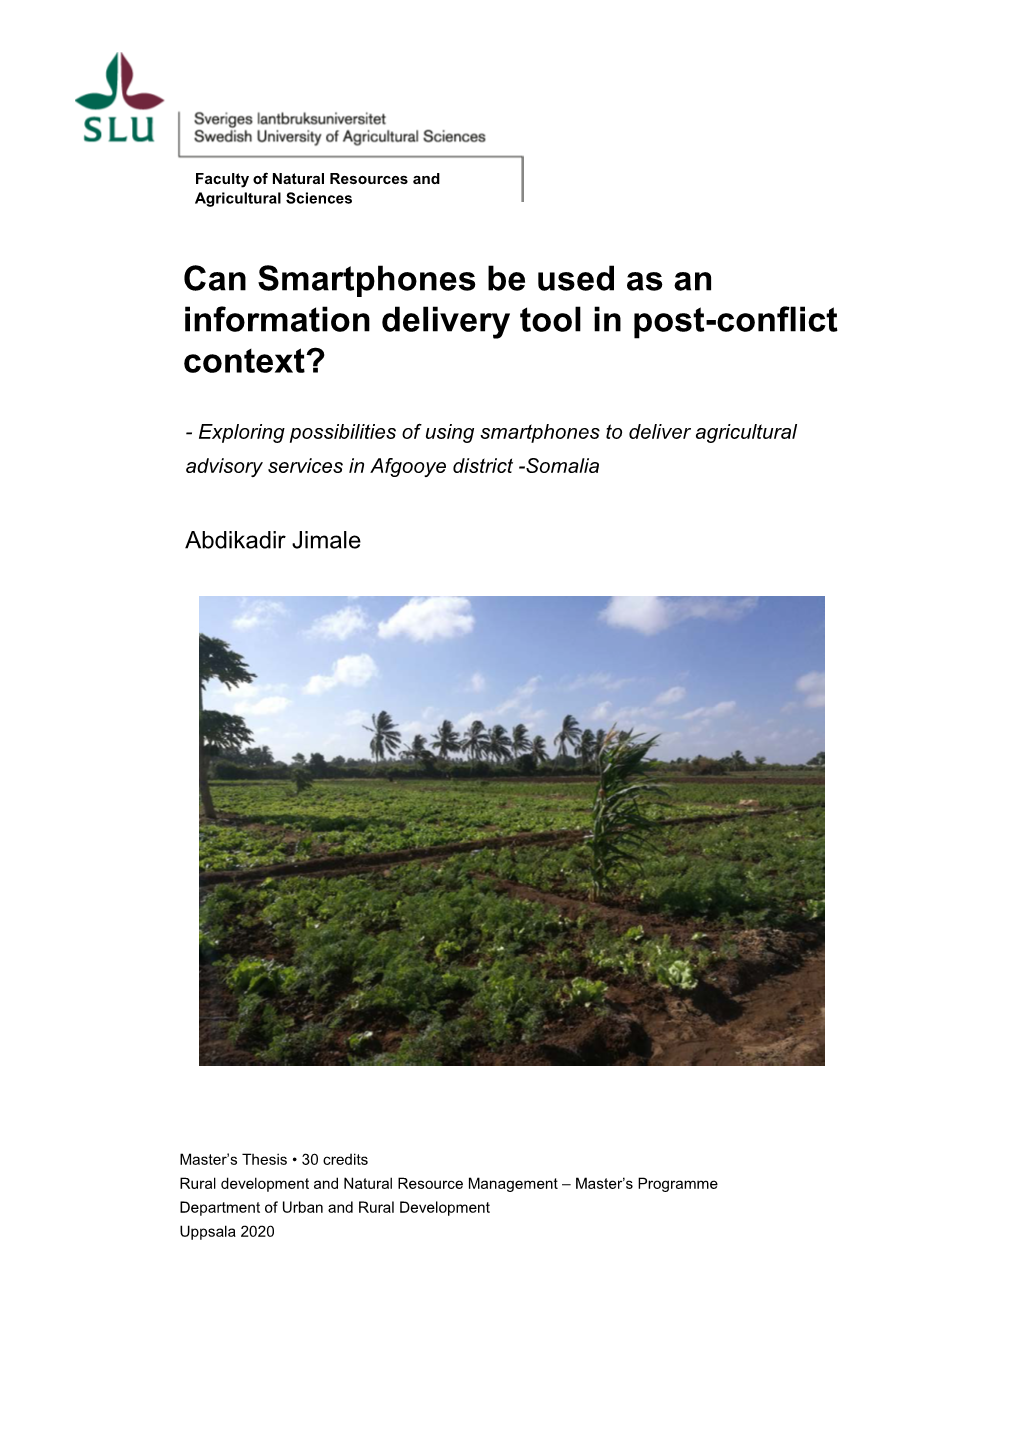 Can Smartphones Be Used As an Information Delivery Tool in Post-Conflict Context?